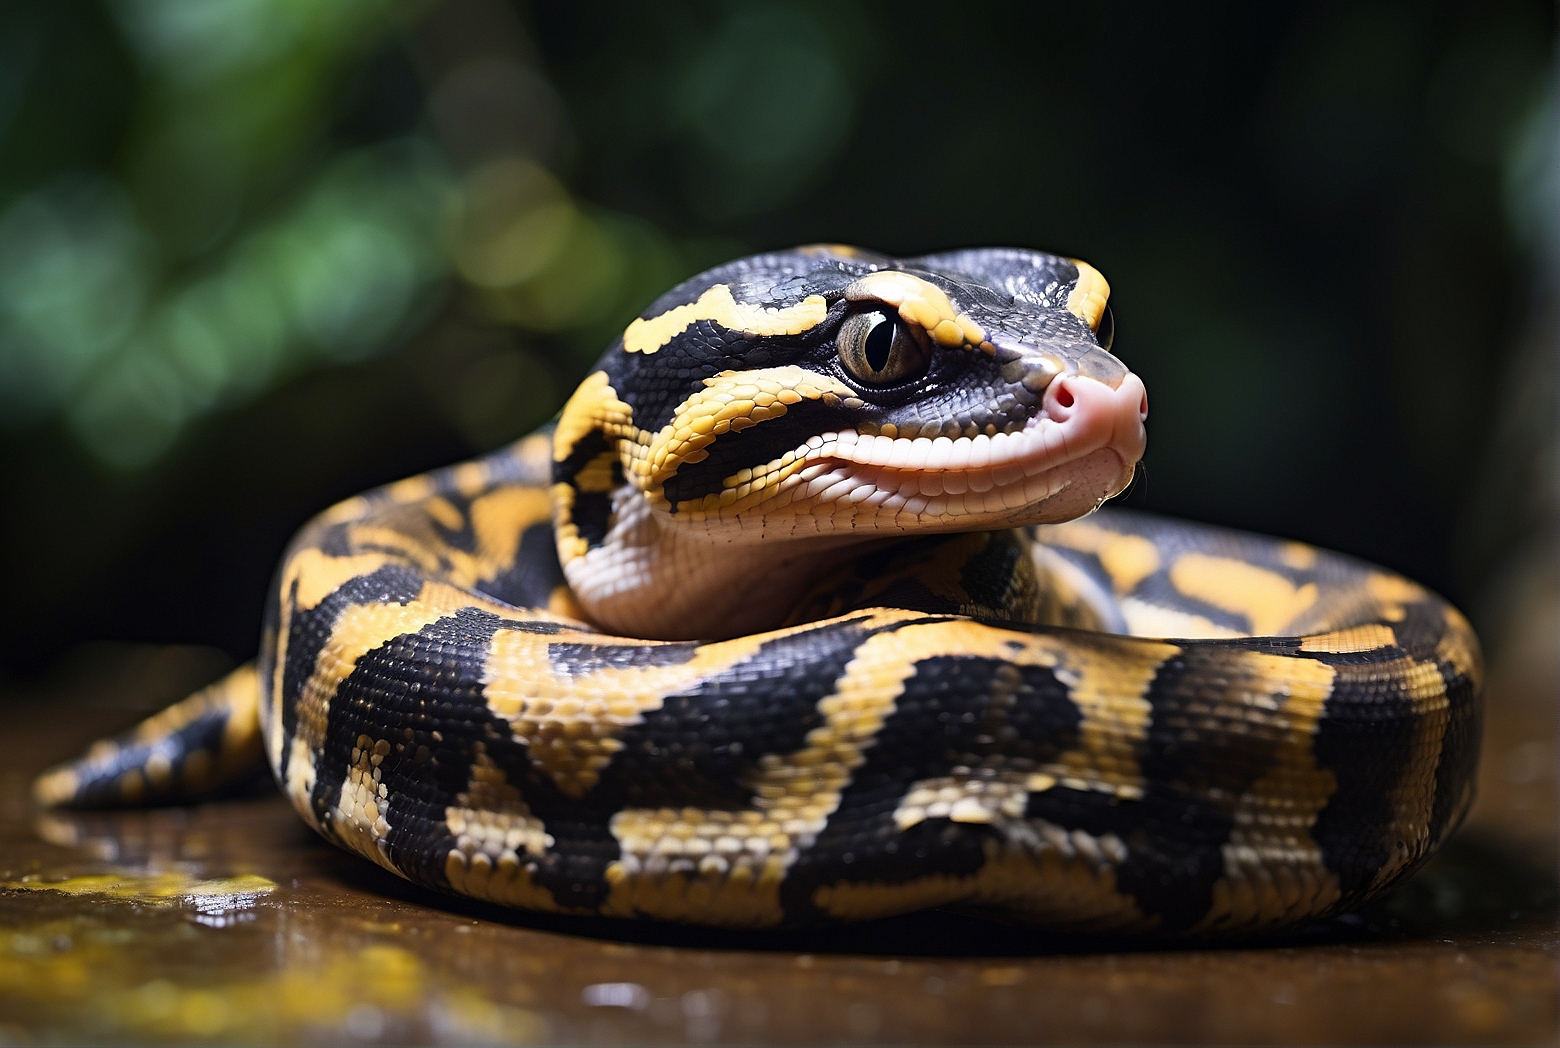 Choosing the Right Tank Size for Your Ball Python